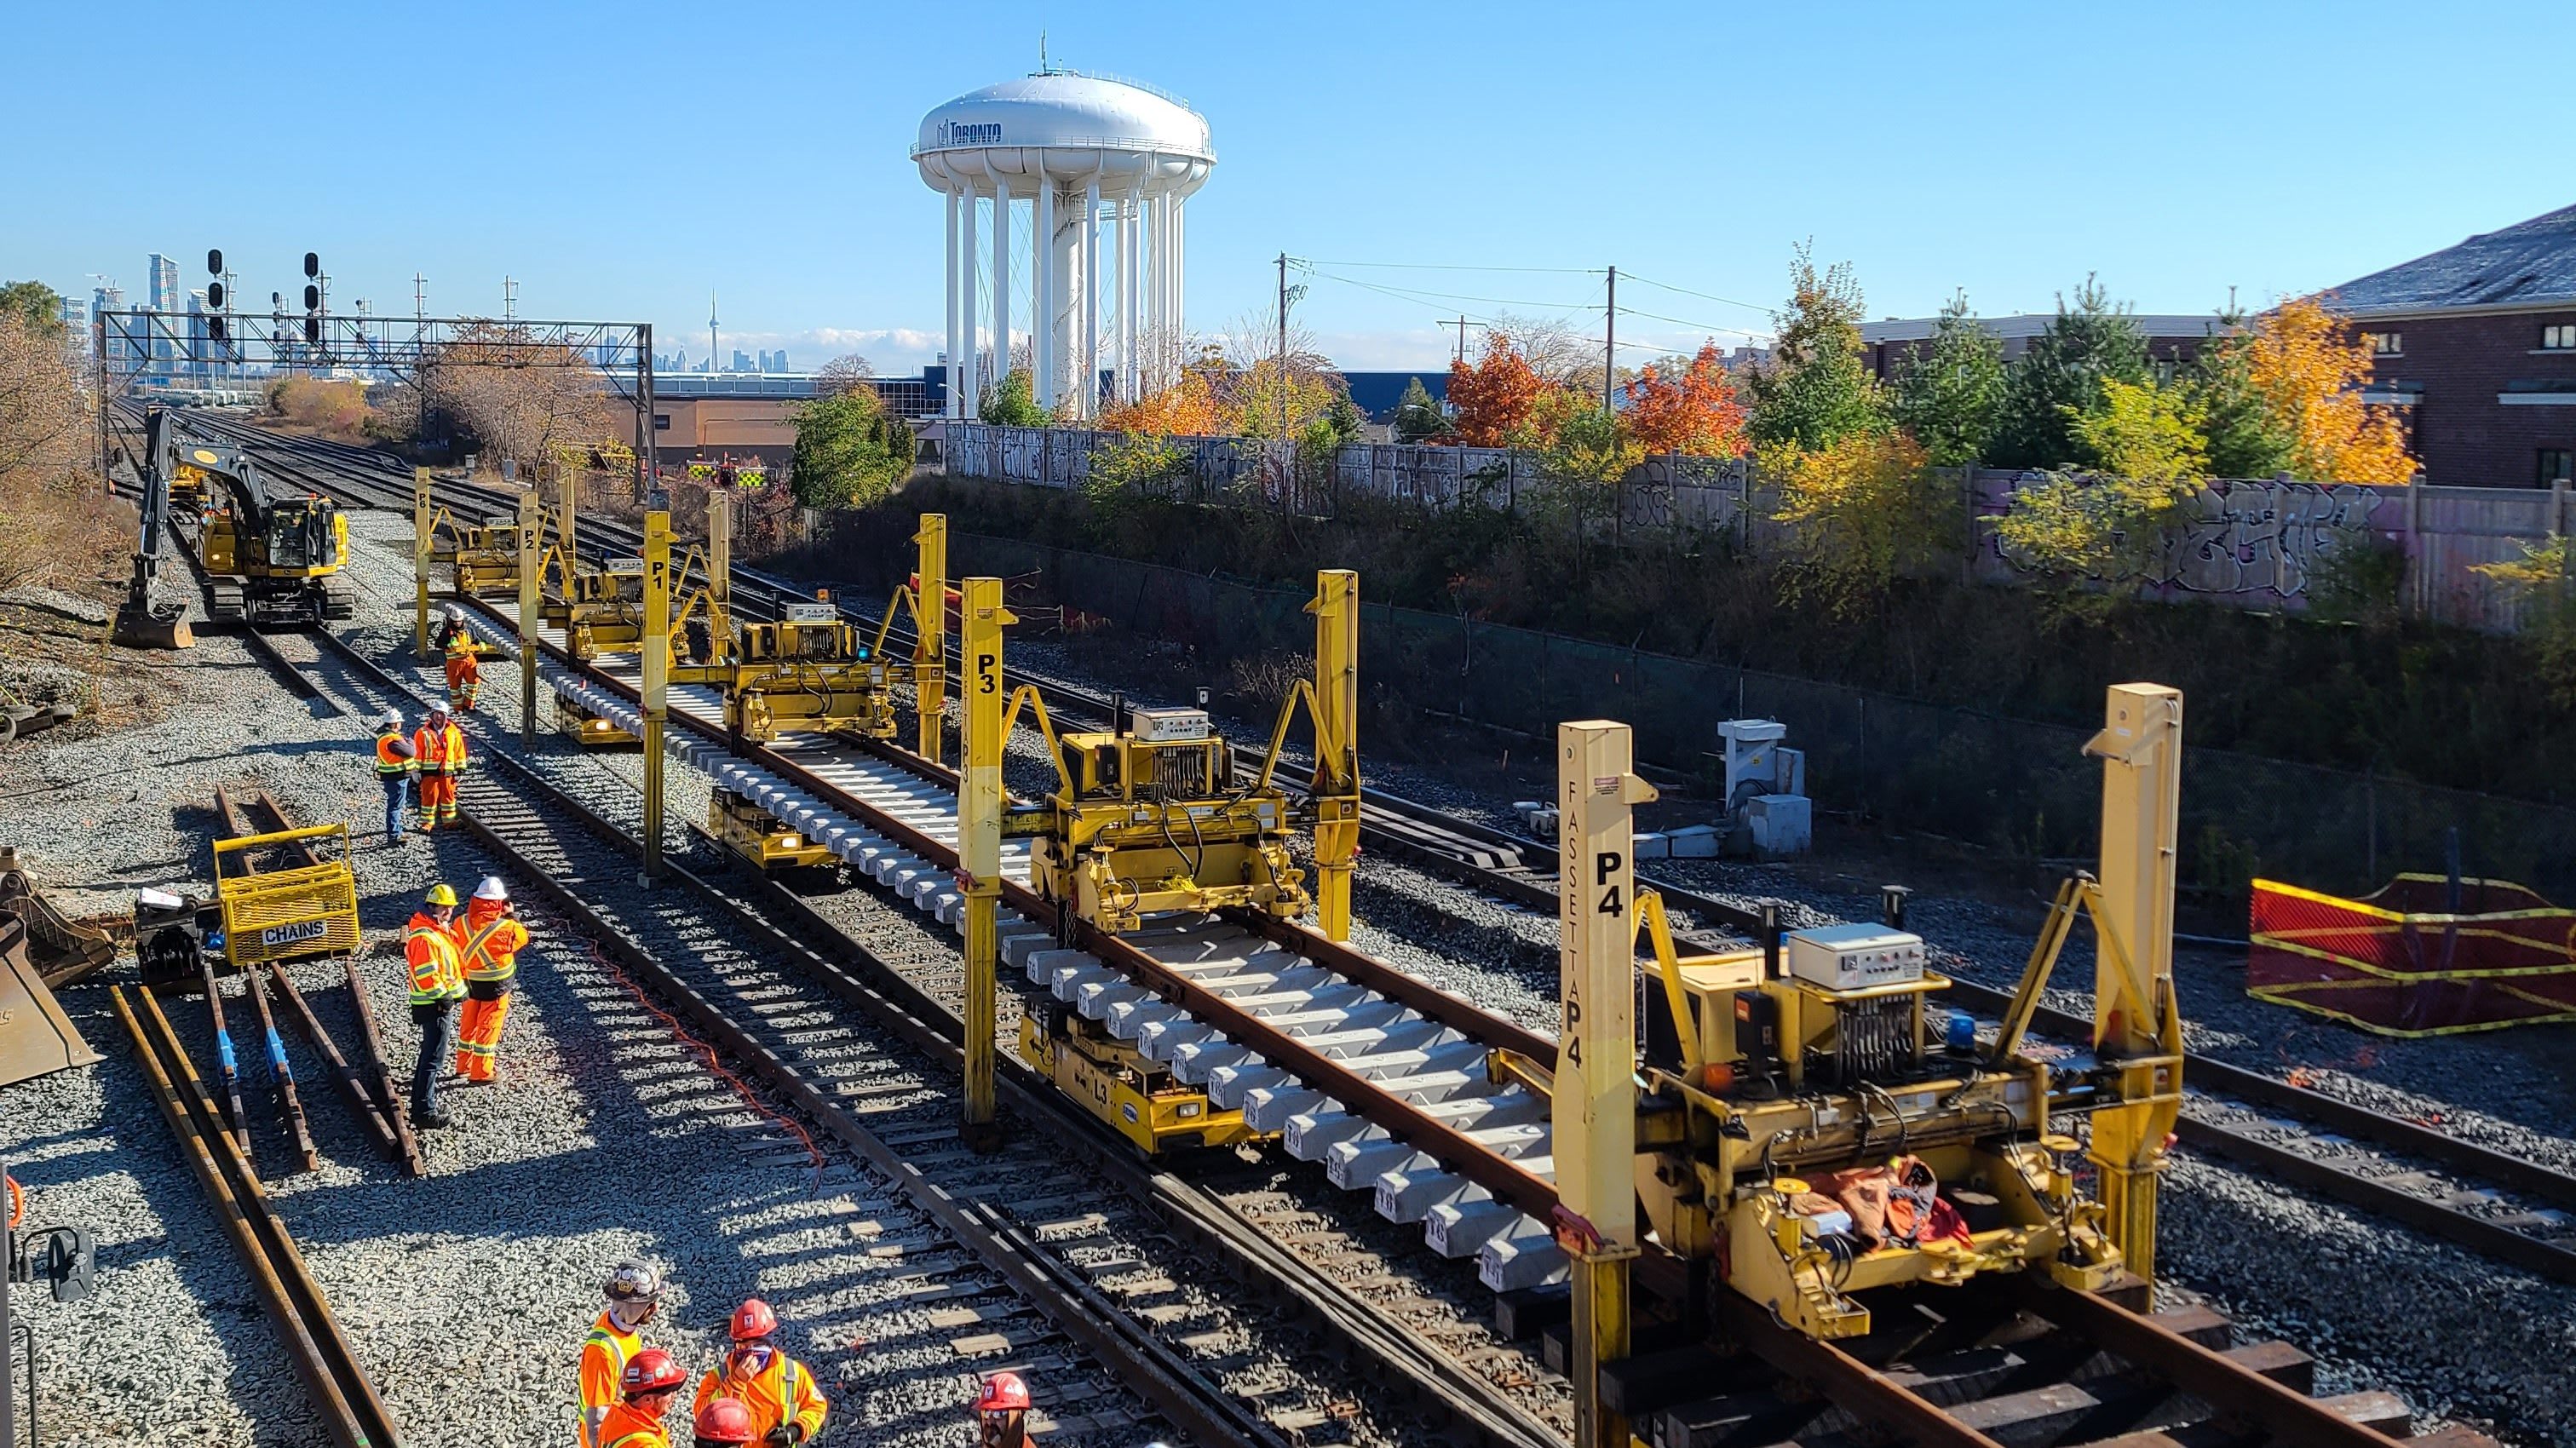 Work crews replacing track and signal infrastructure